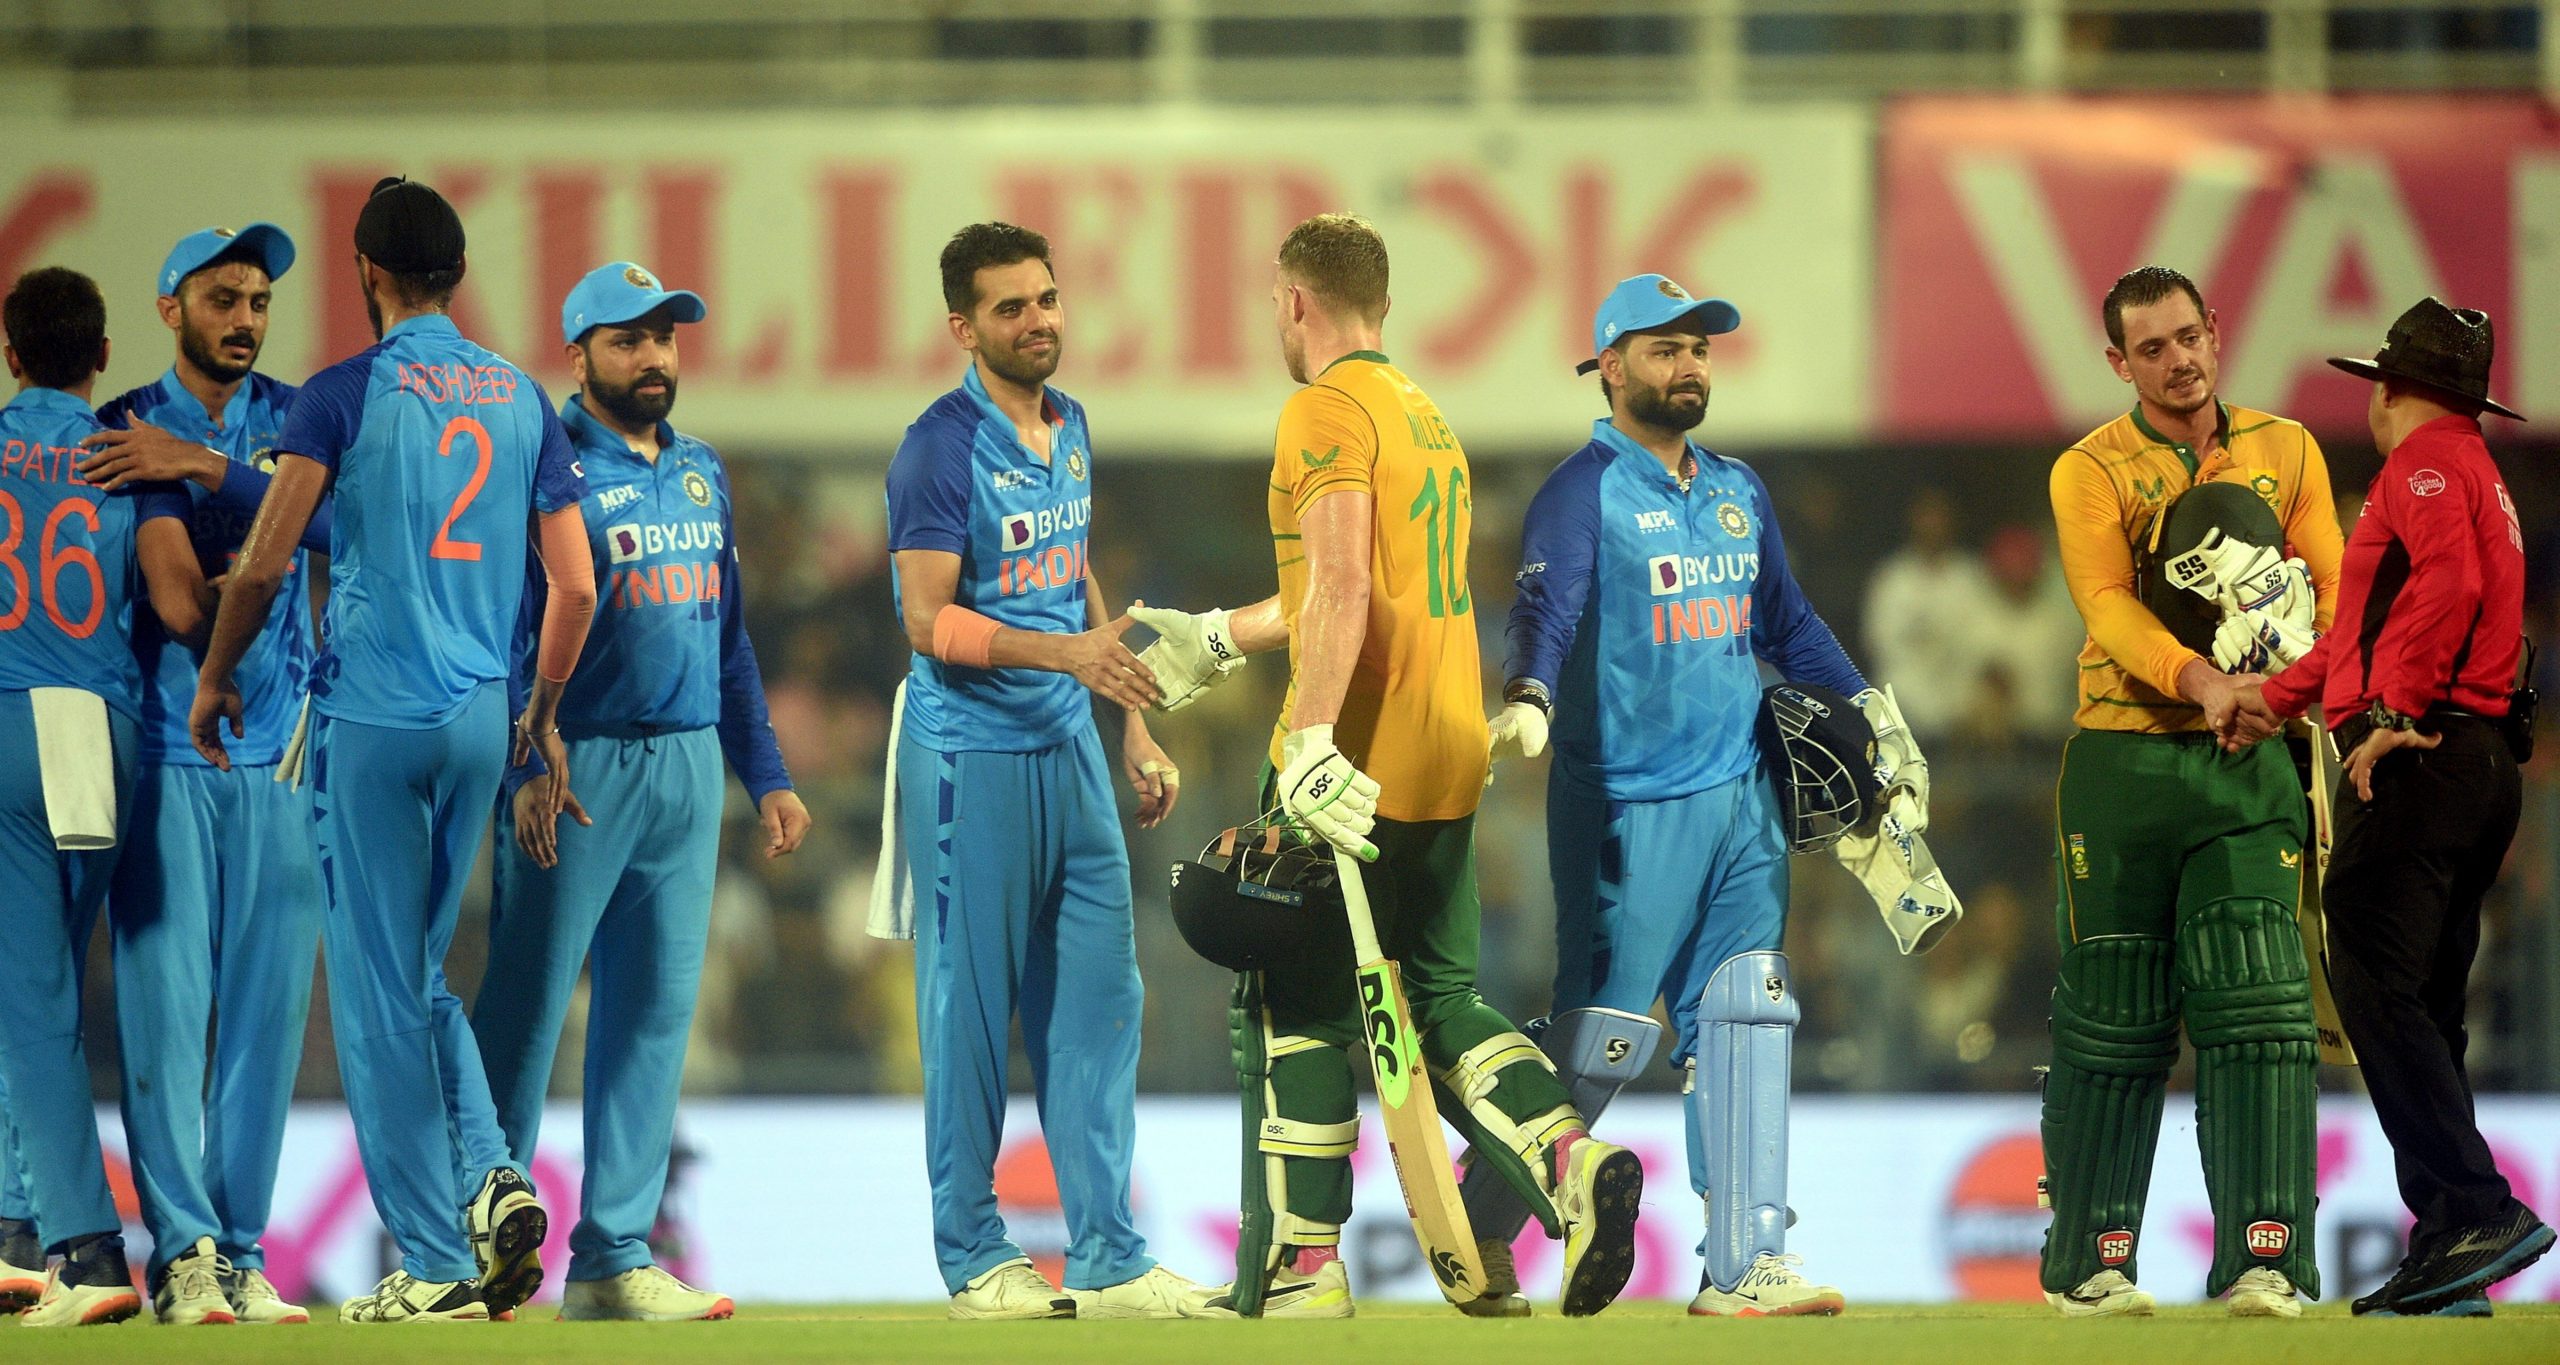 3rd T20I: Kohli, KL Rahul rested as India look to whitewash South Africa